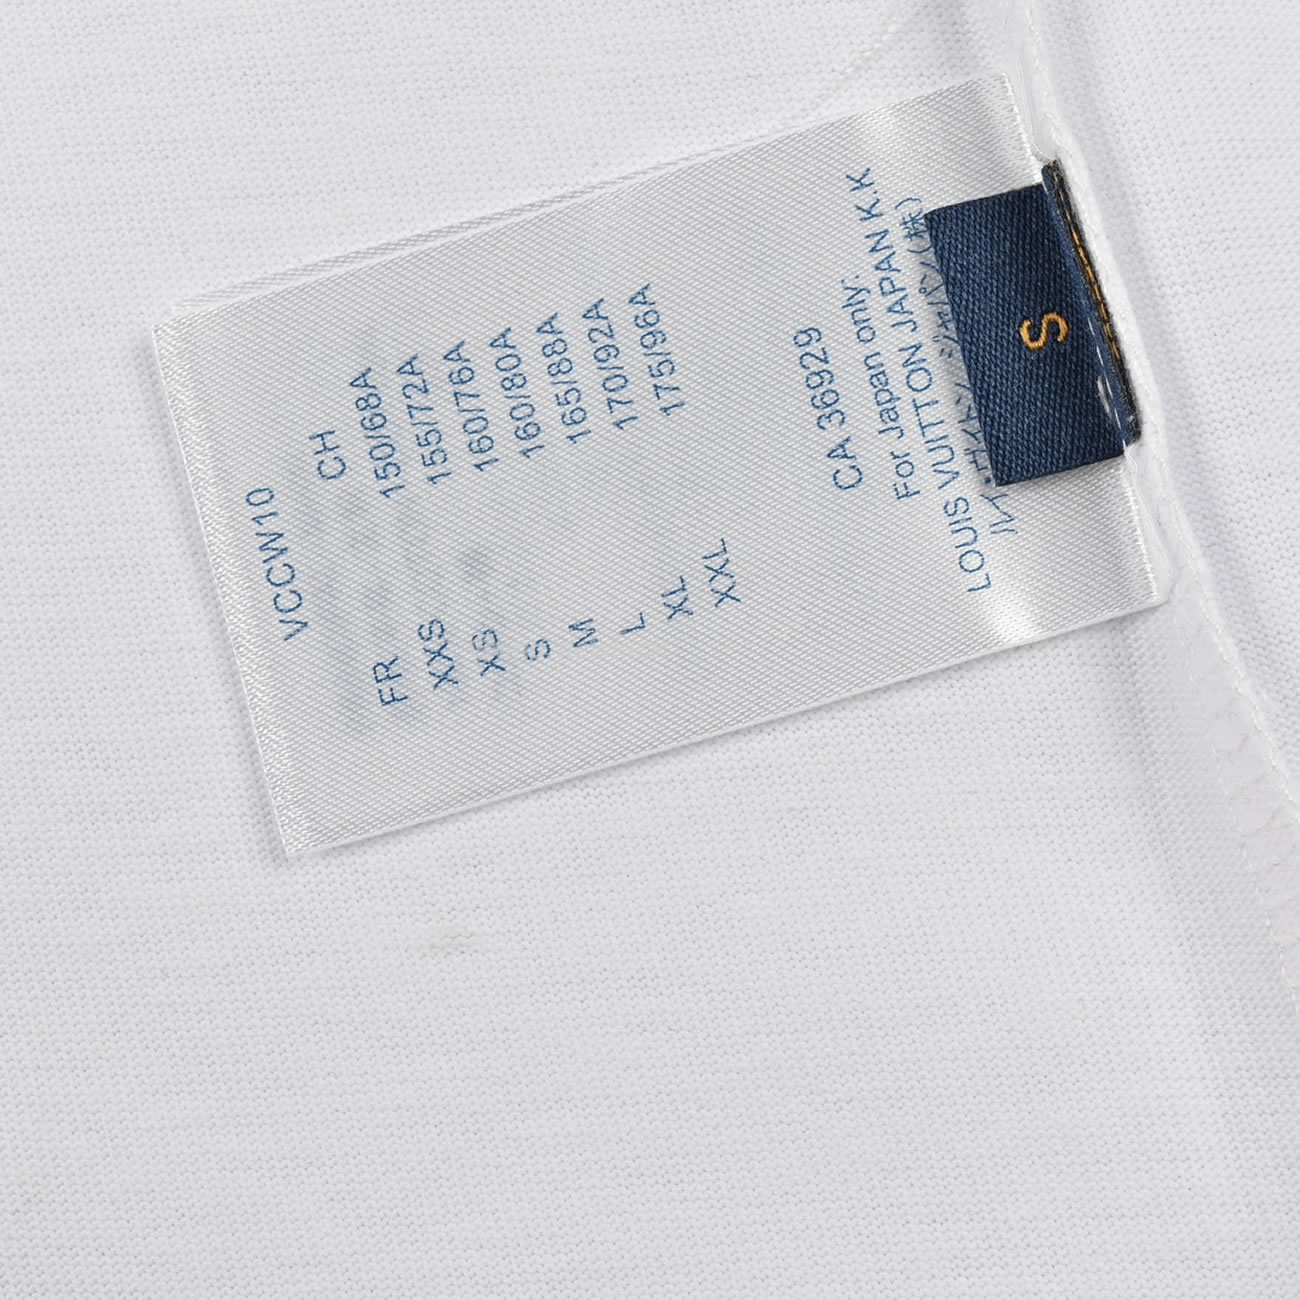 Louis Vuitton 24ss Stitching Cursive Embroidery Letters, Short Sleeves T Shirt (6) - newkick.org